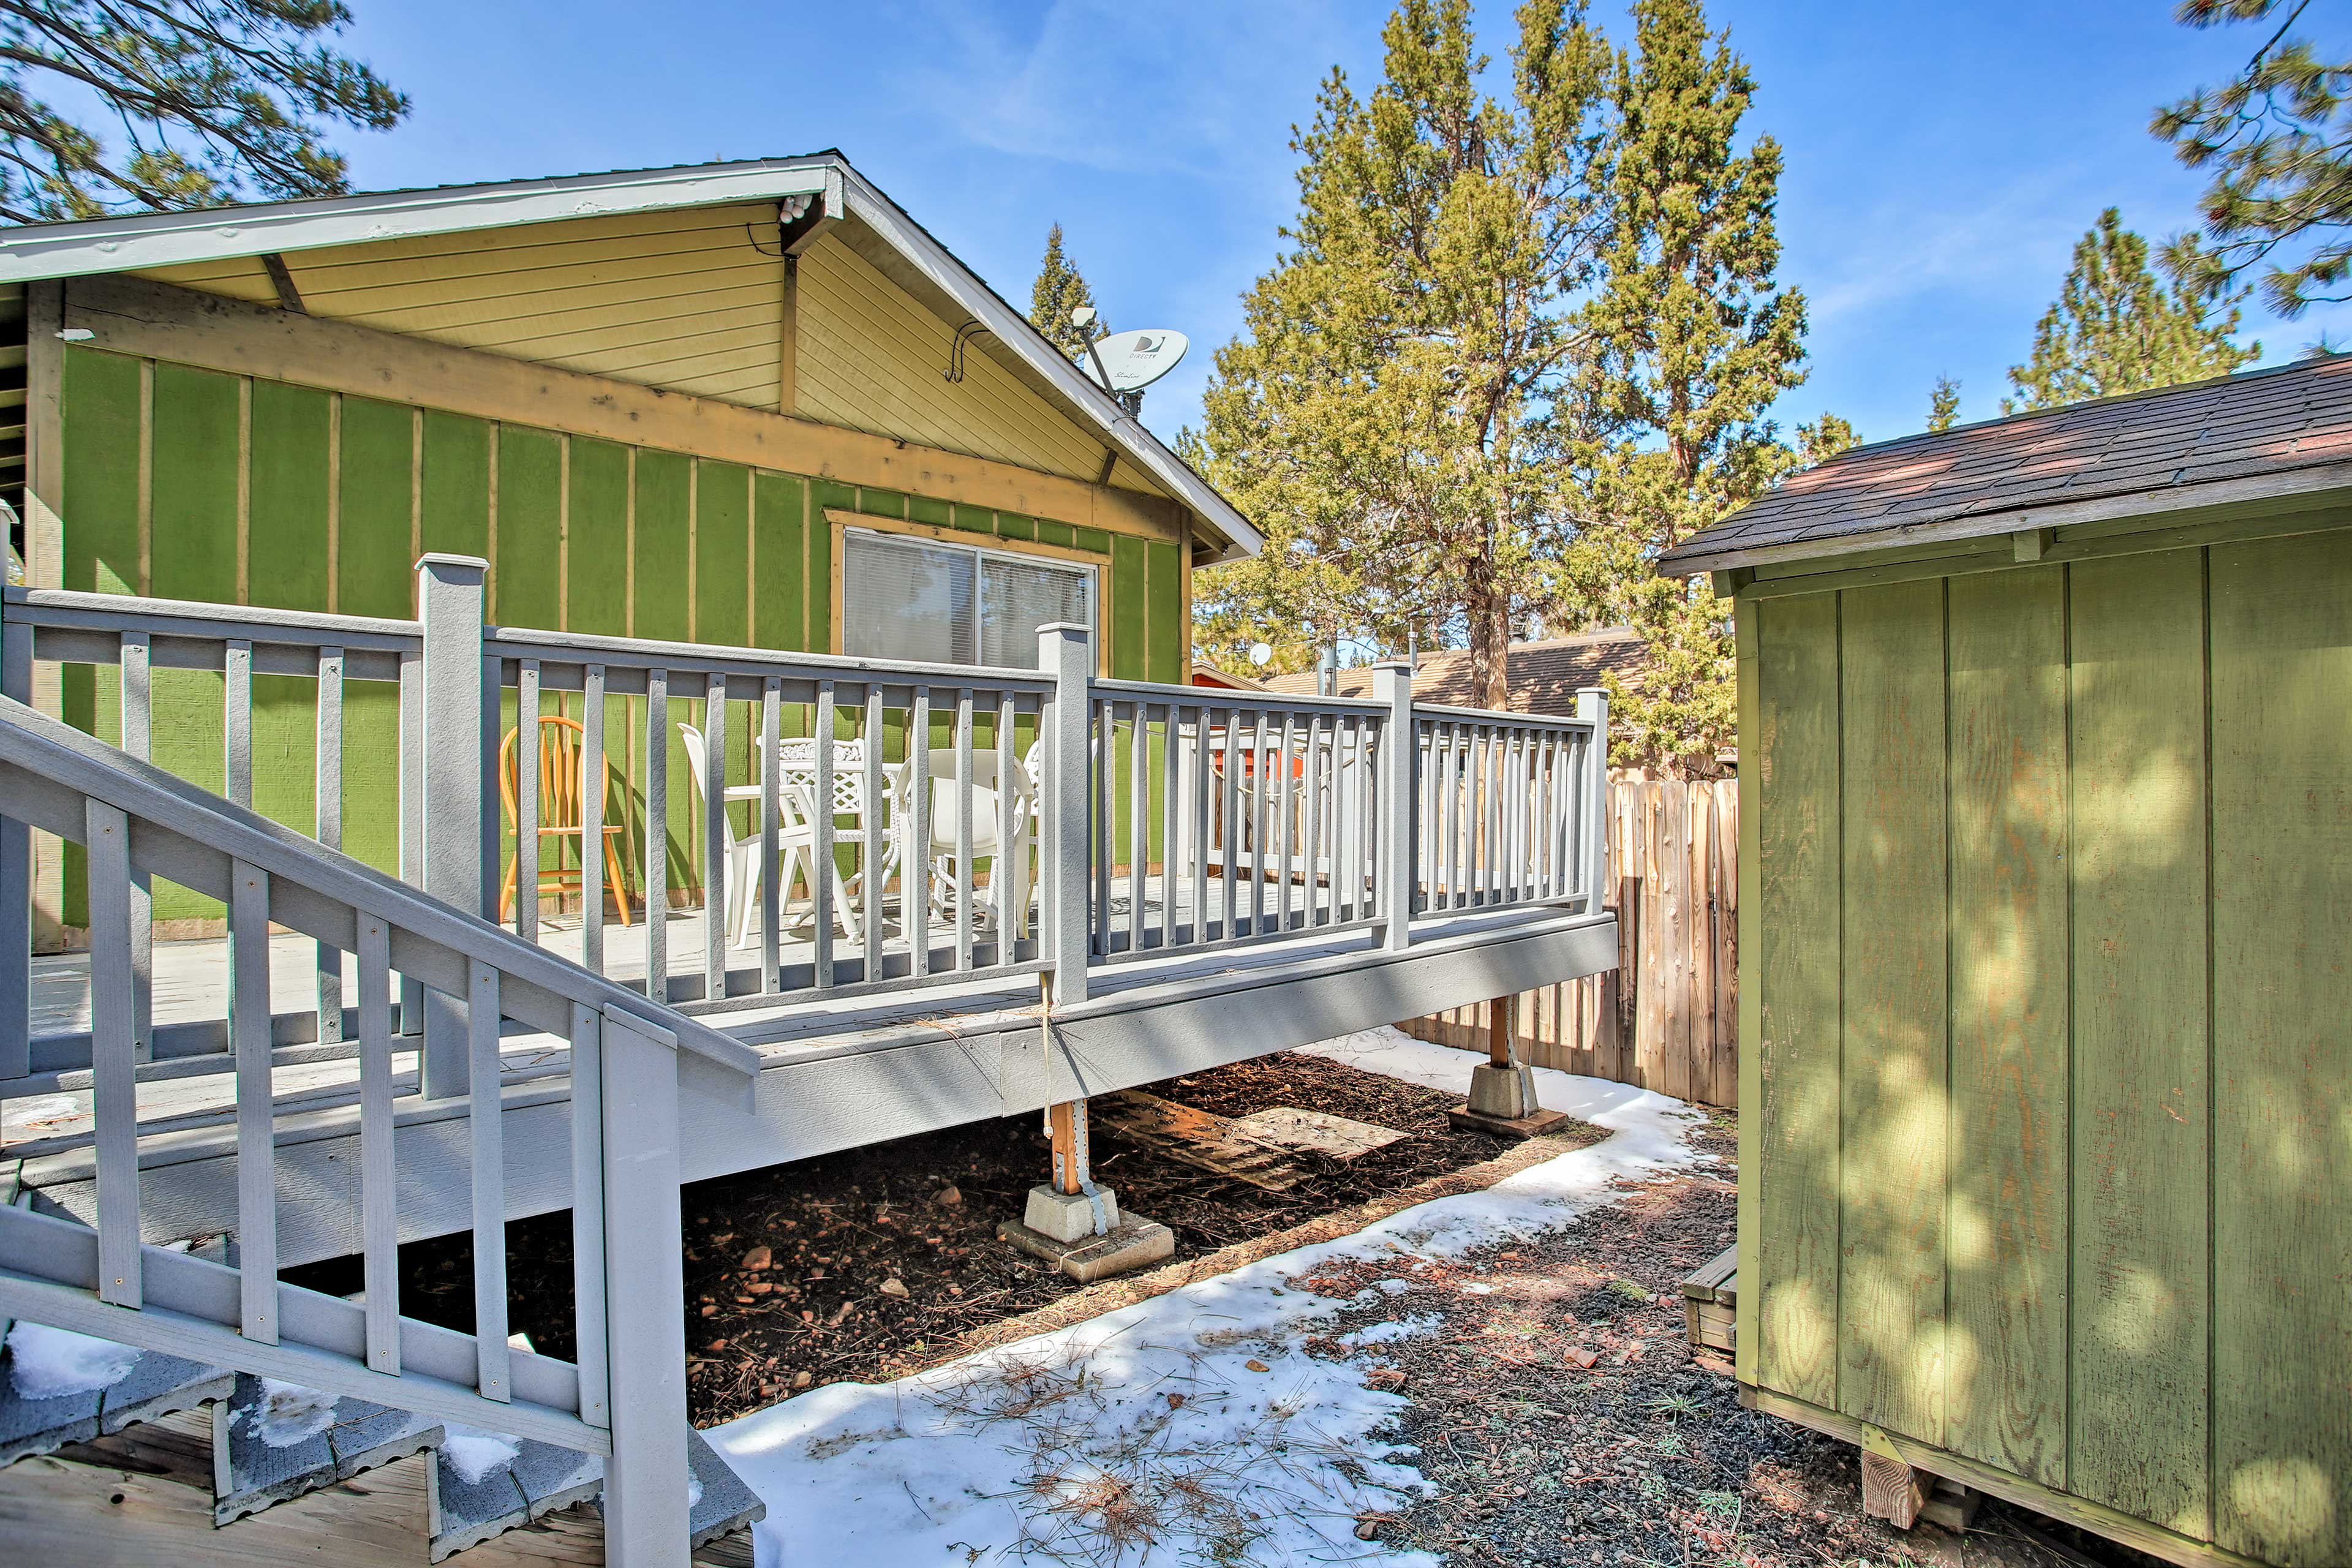 Explore shops, restaurants, and Big Bear Lake from the convenience of this home.